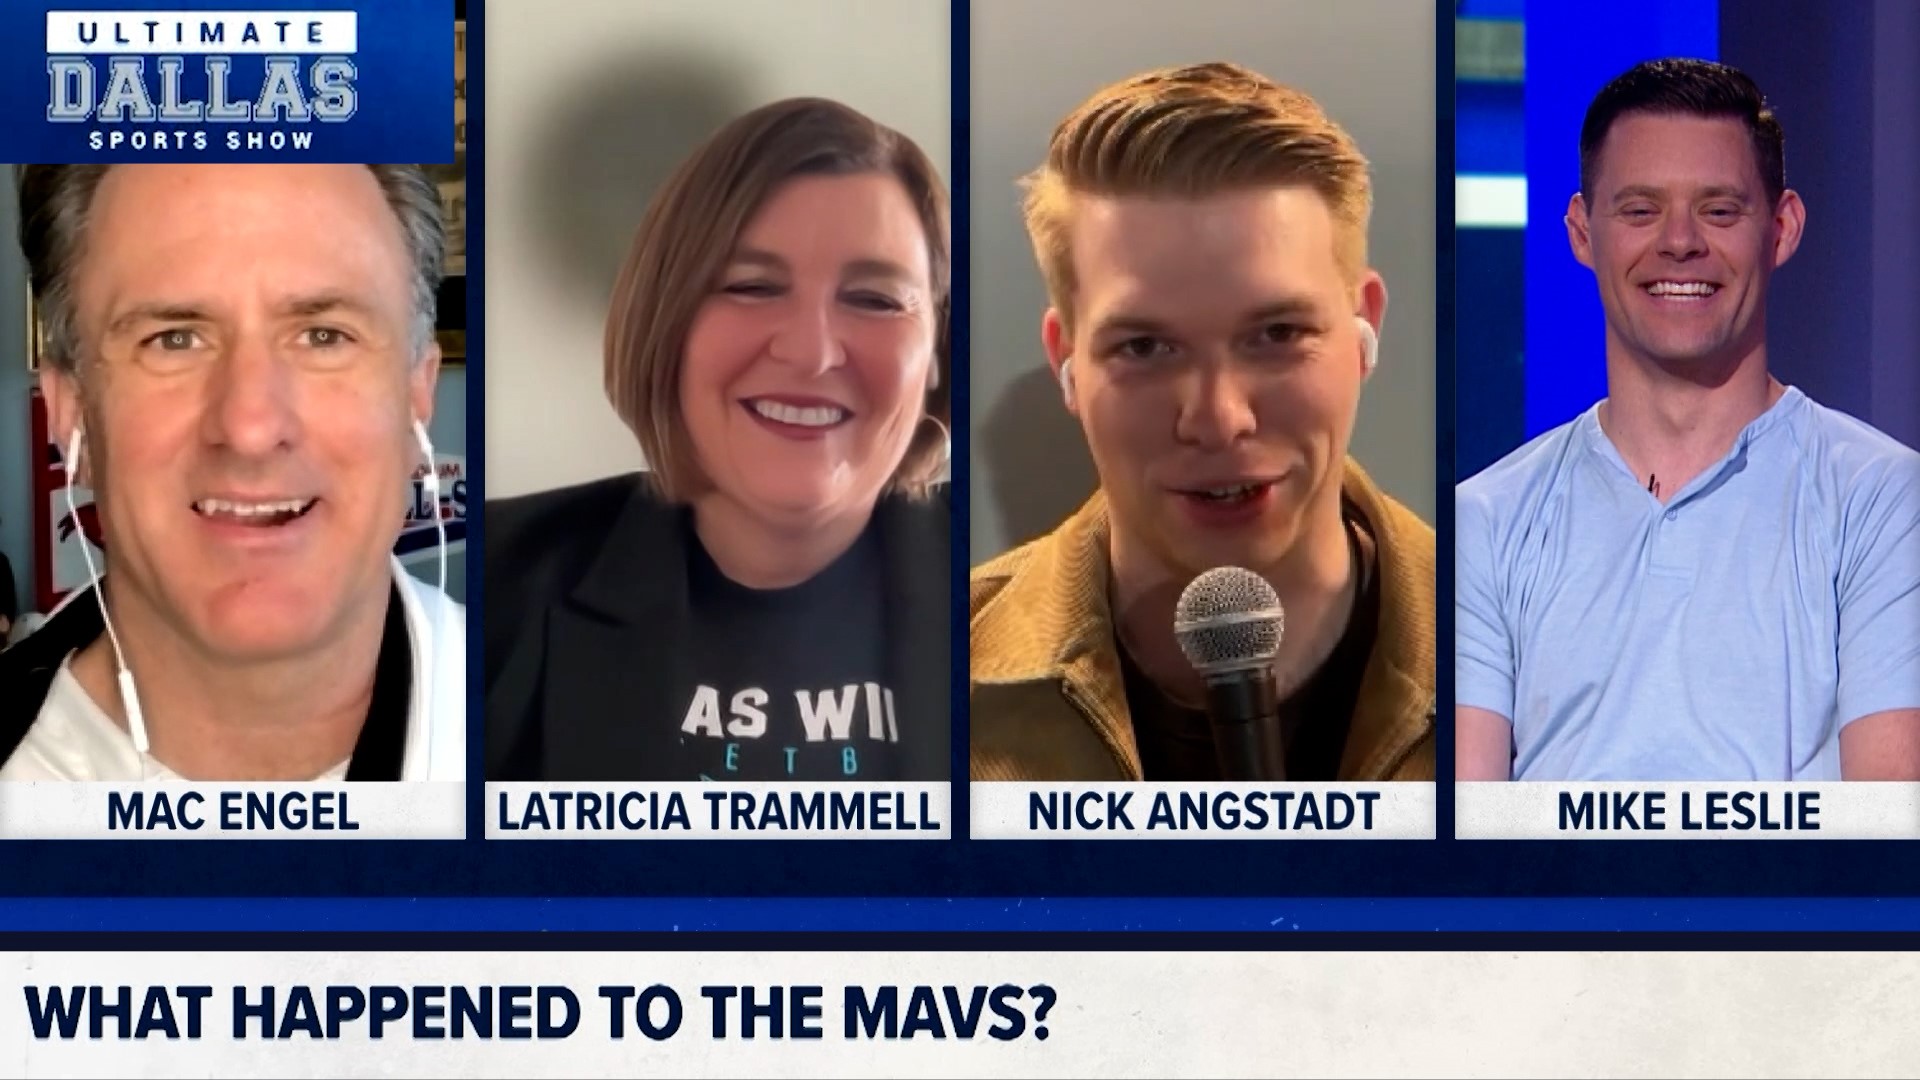 The Mavericks opened the playoffs with a disappointing loss to the Clippers, while the WNBA undergoes a movement. The Ultimate Dallas Sports Show breaks it all down!